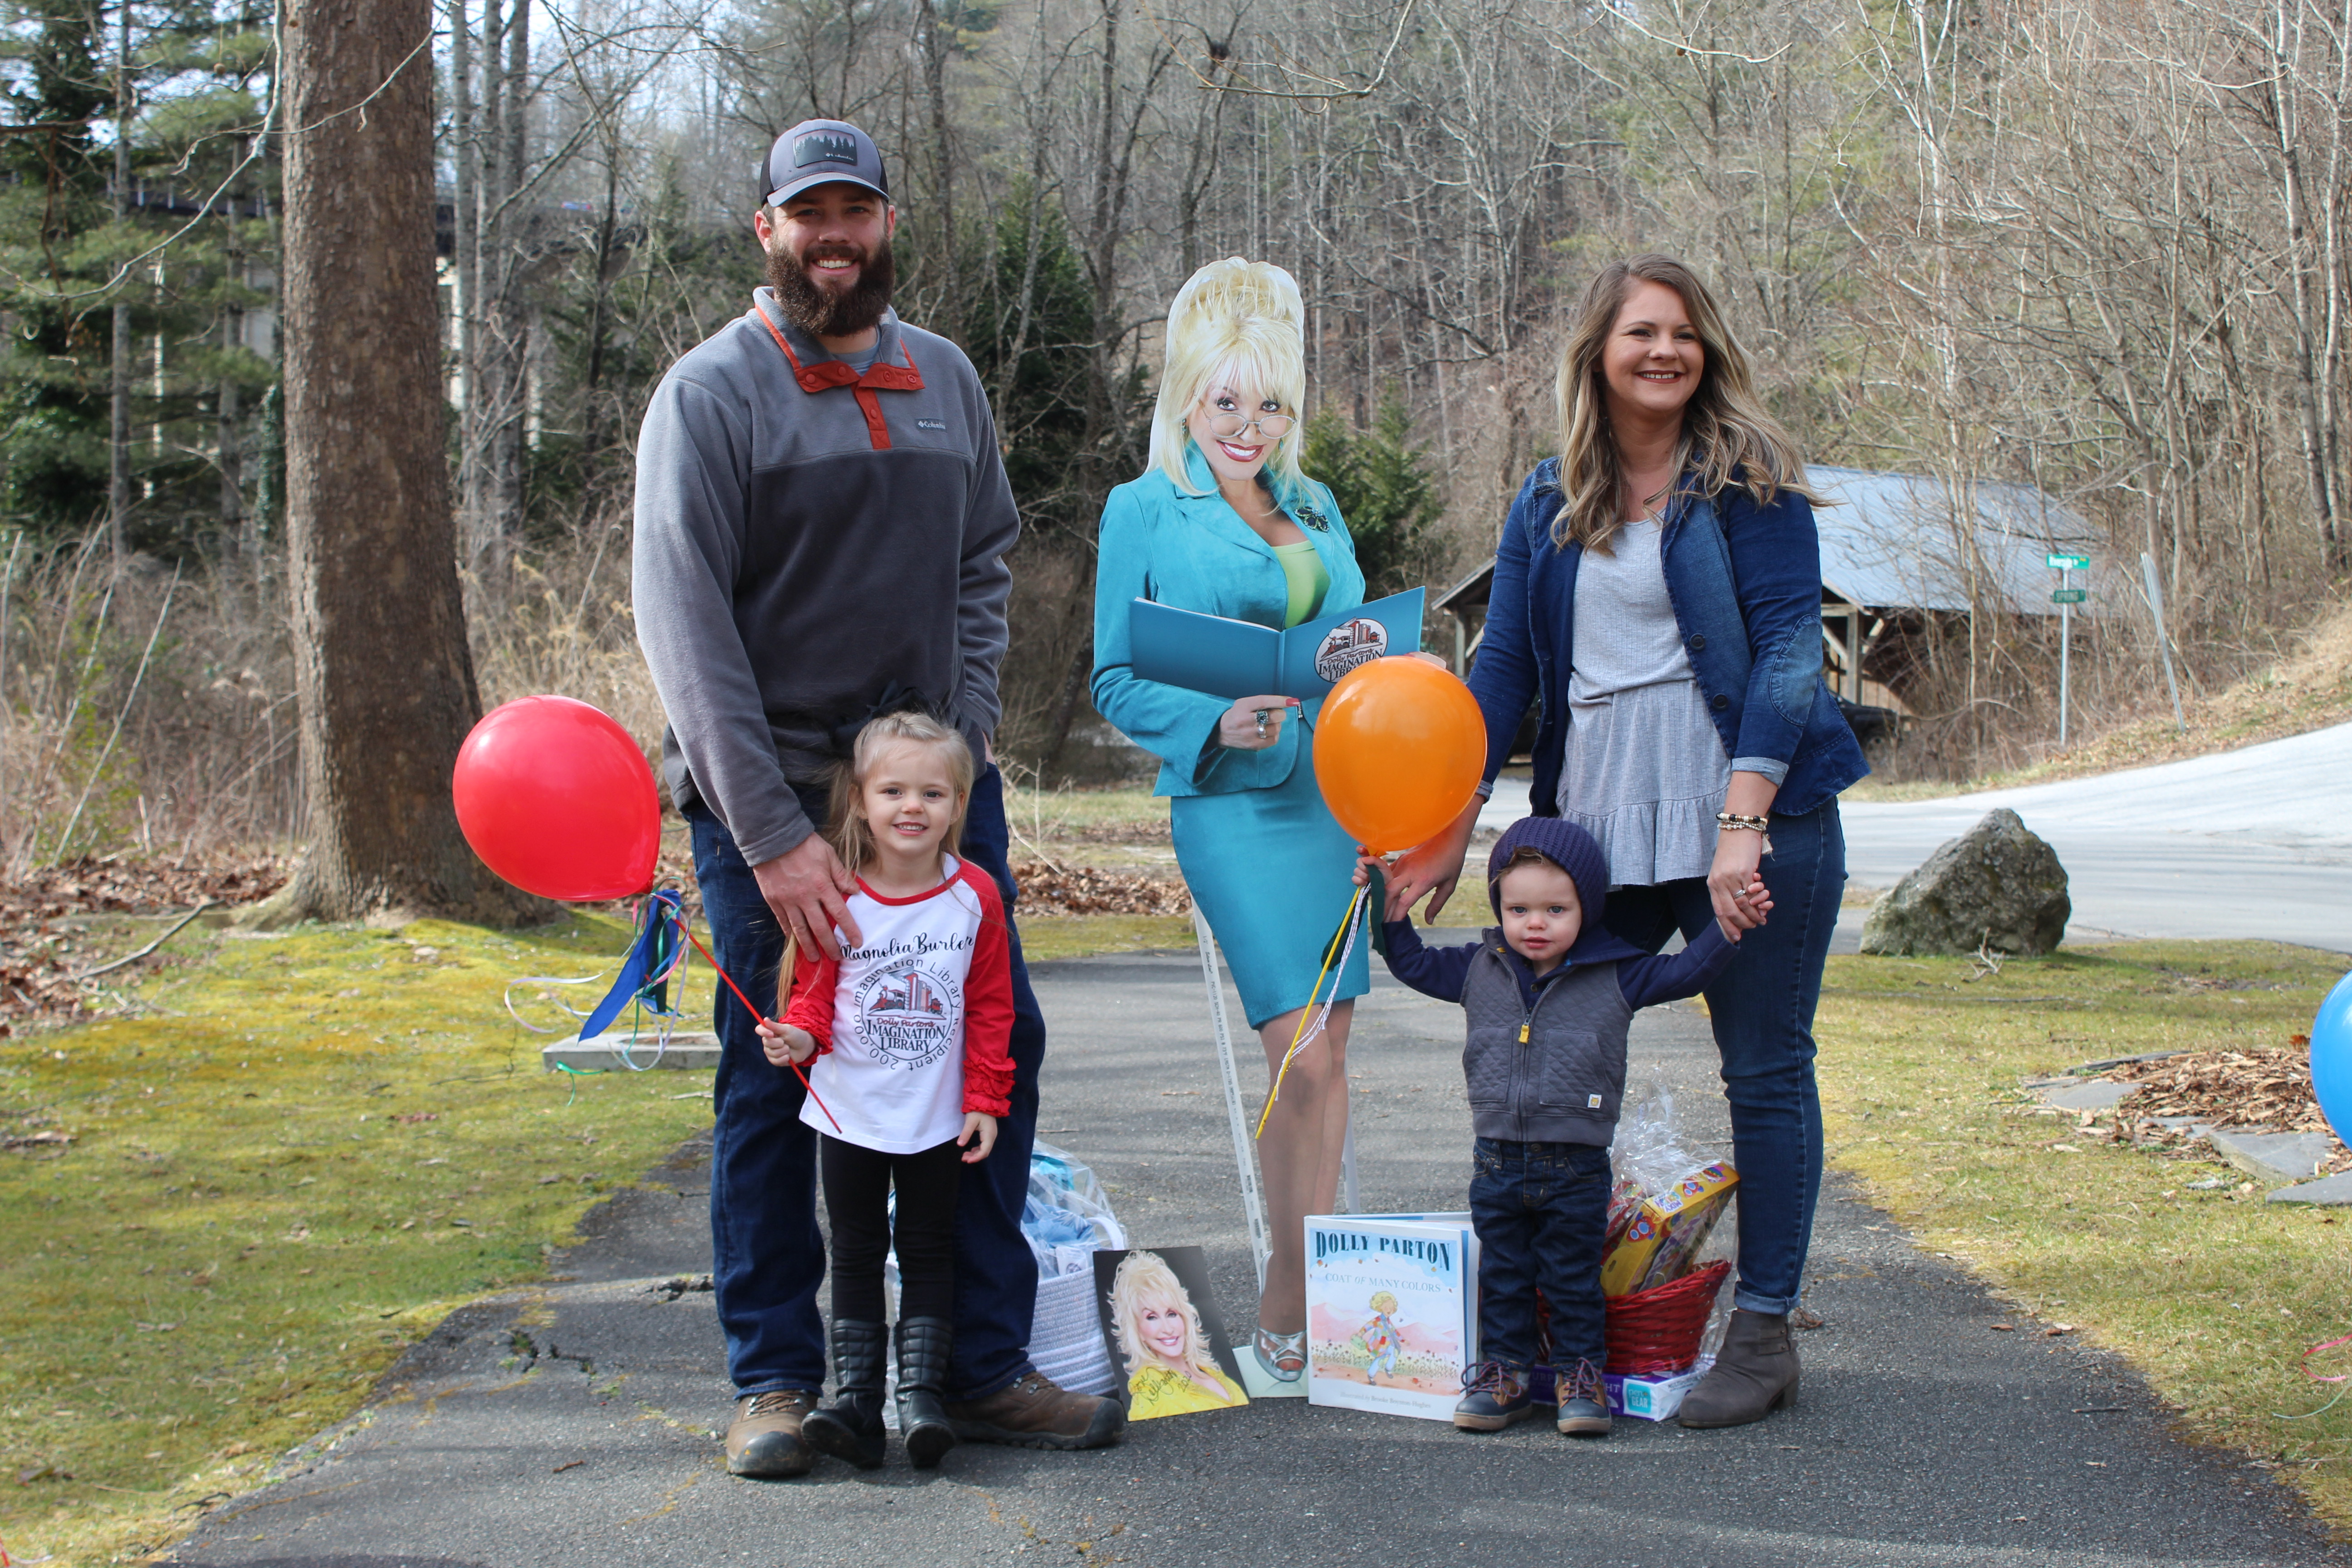 Magnolia Burleson poses for a group photo in Riverside Park with the Dolly Parton cut-out, her parents Hogan and Brandi Burleson and her brother, Memphis. (MNJ Photo/Juliana Walker)